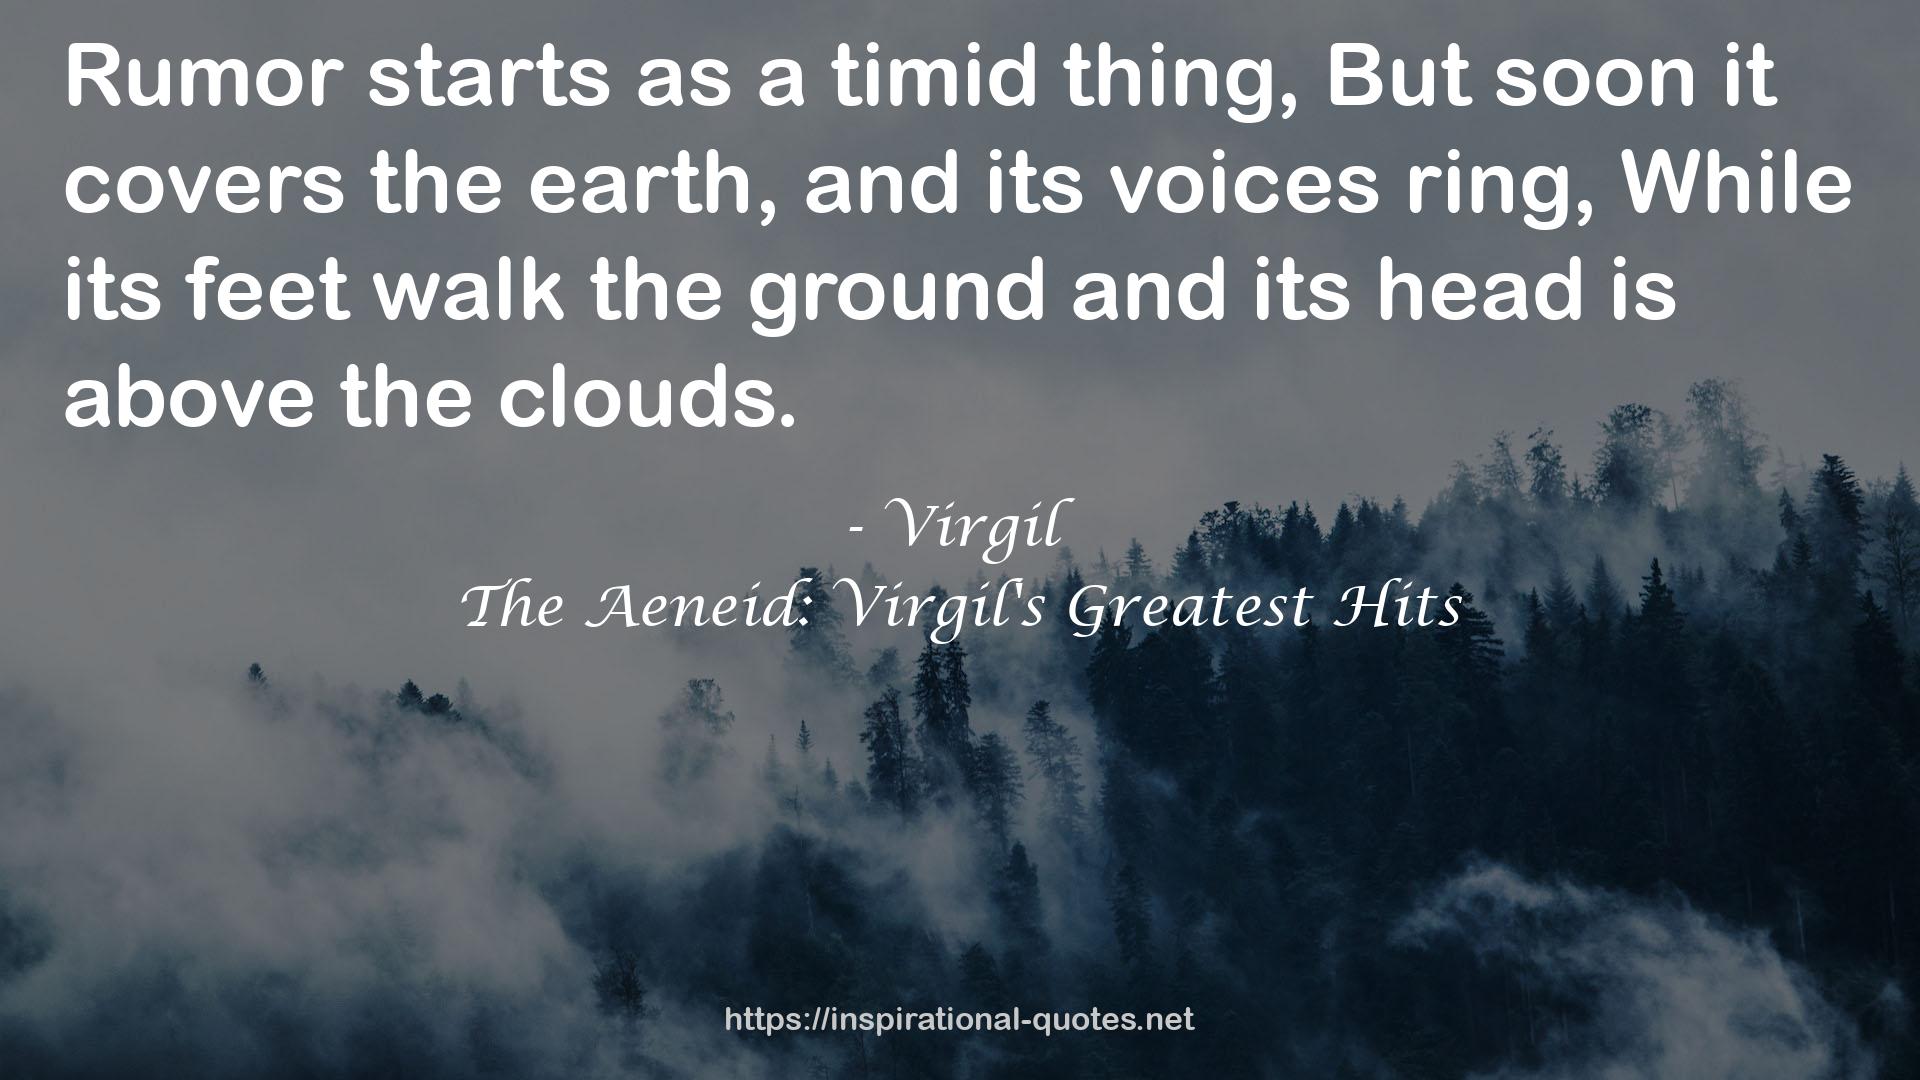 The Aeneid: Virgil's Greatest Hits QUOTES